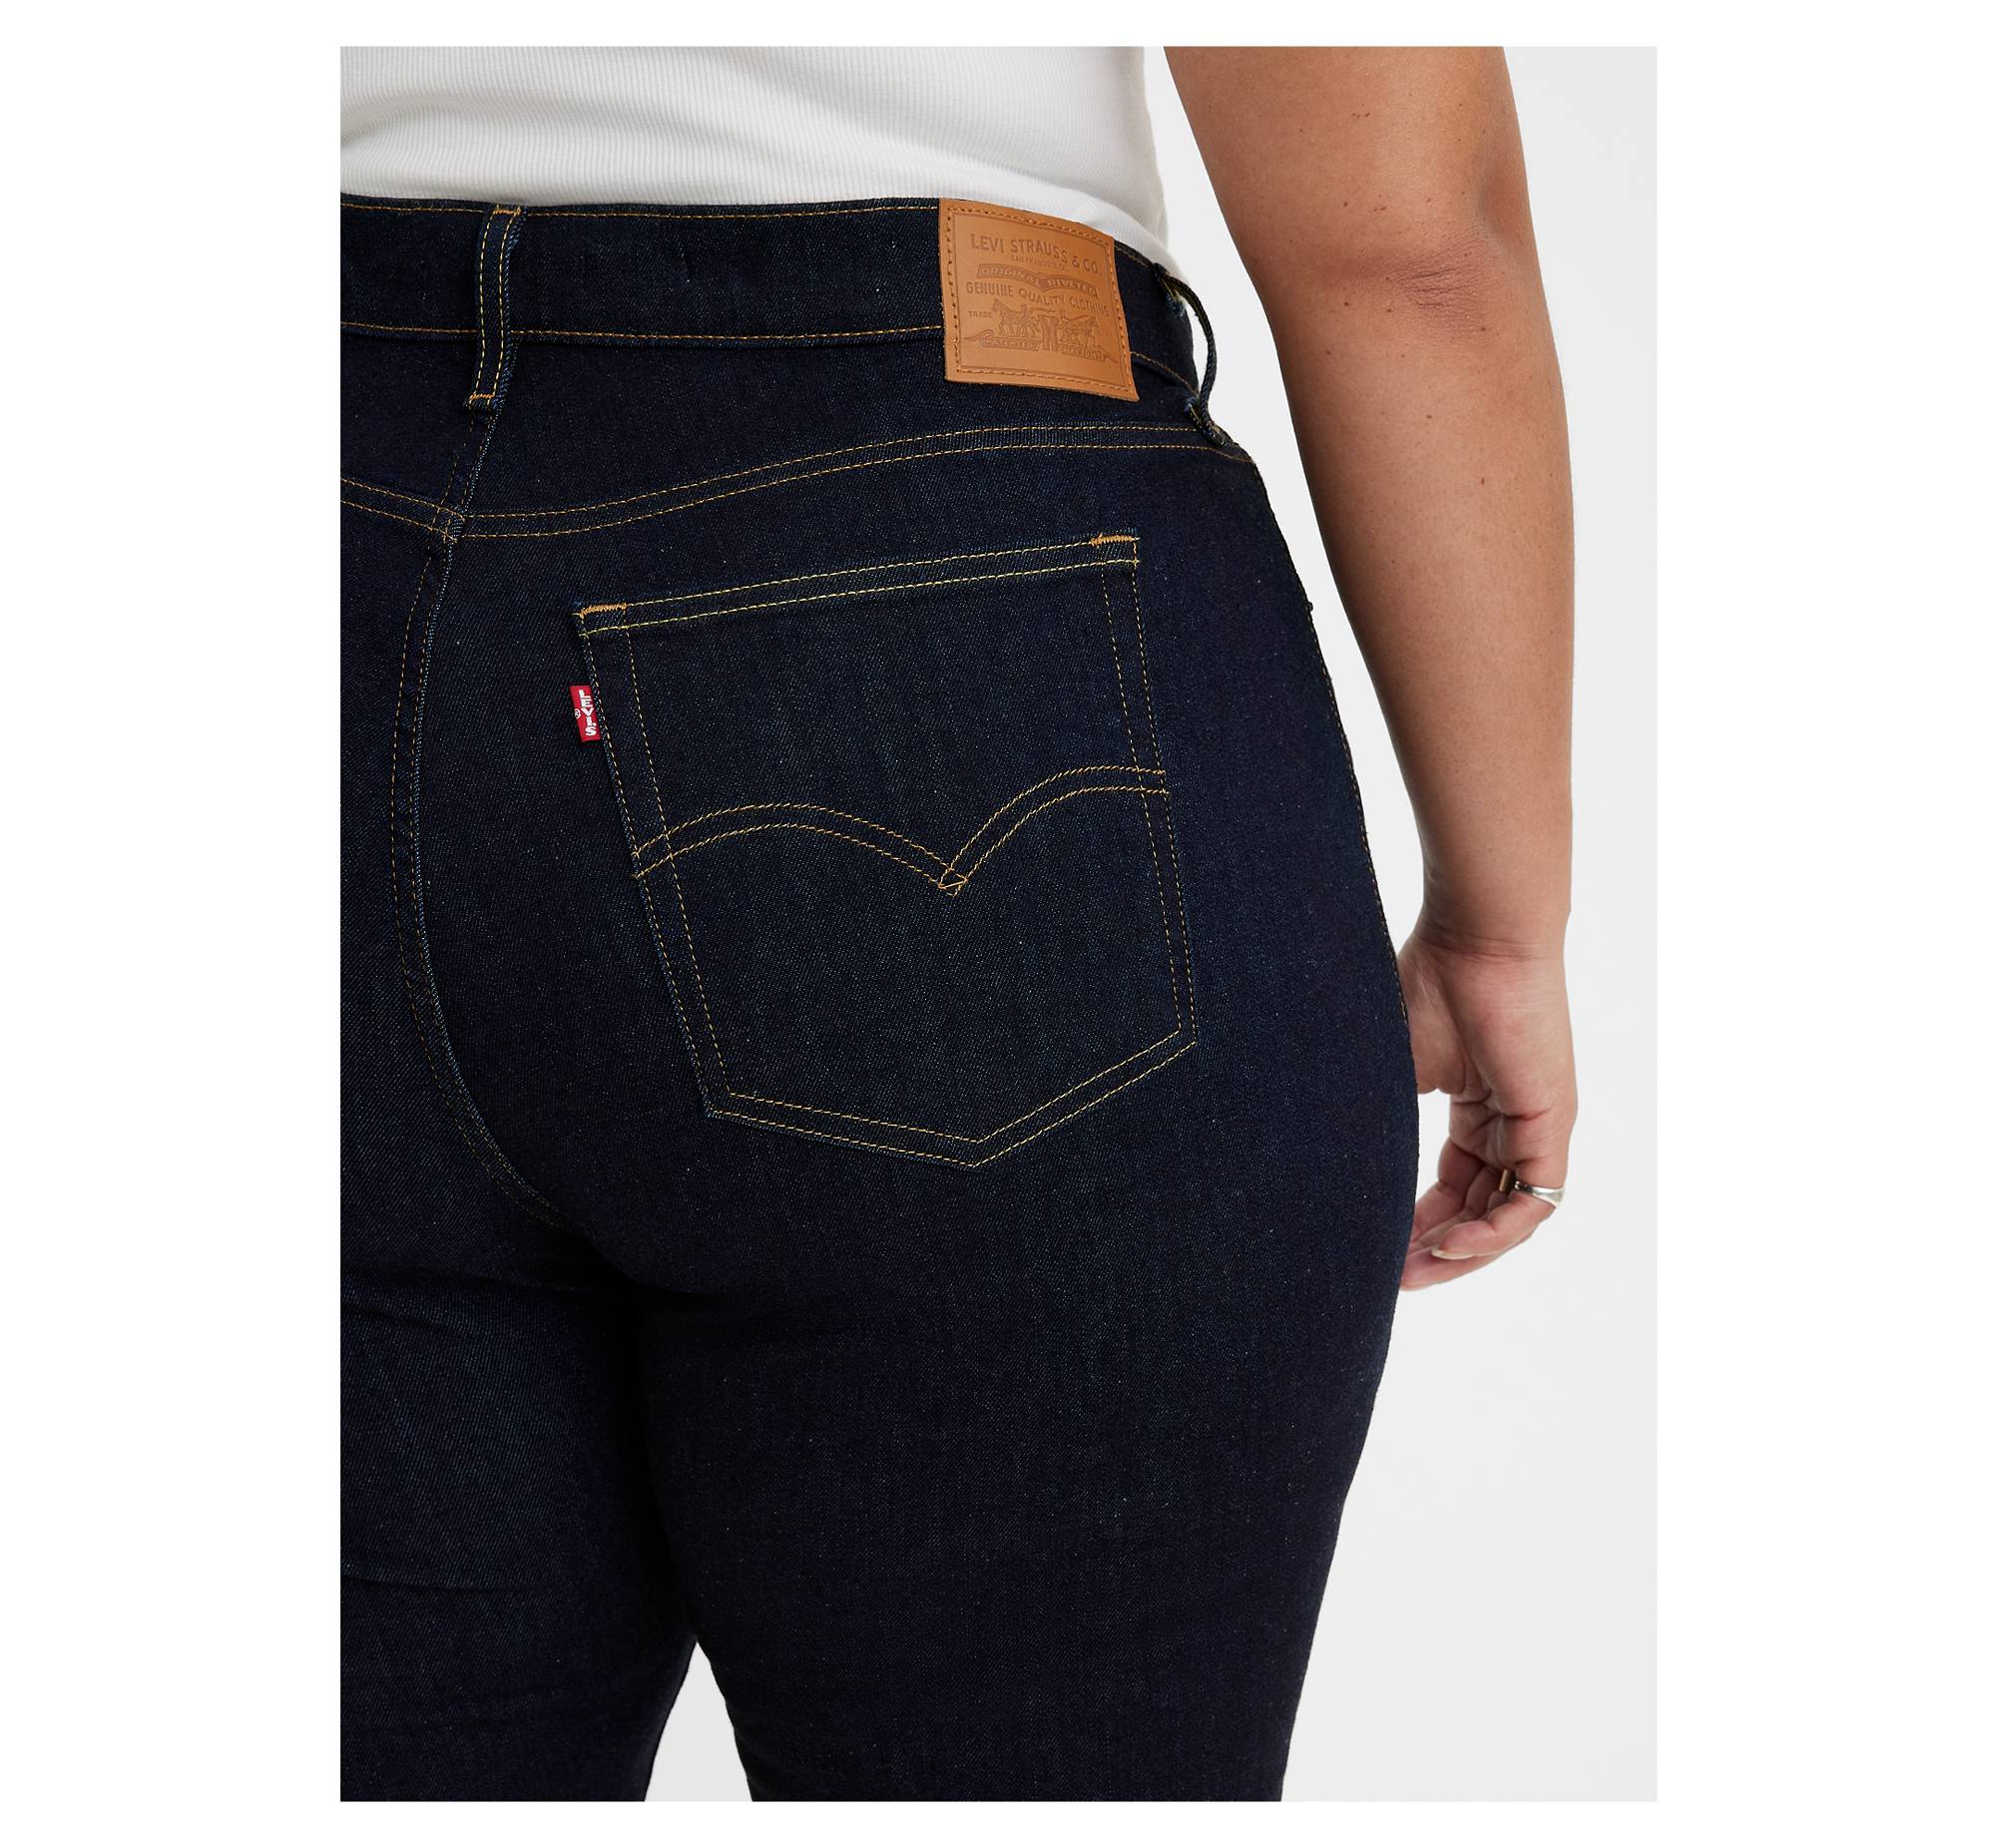 721 High Rise Skinny Jeans (Plus Size) 4